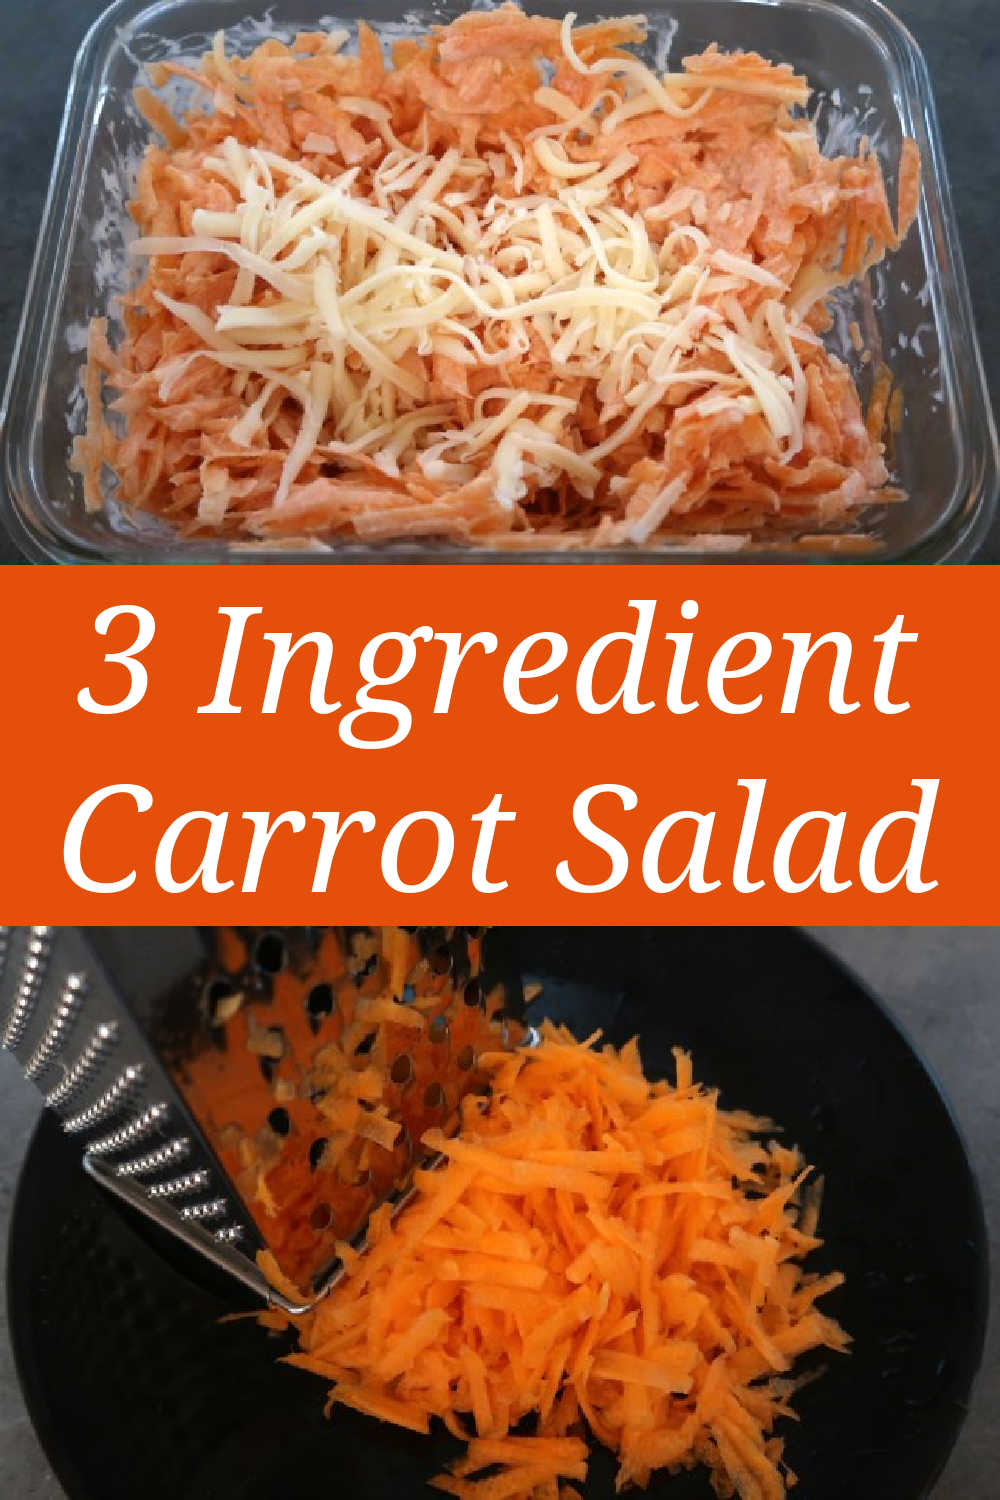 Simple Carrot Salad Recipe - The Best Easy and Creamy 3 Ingredient Healthy Grated Carrot Salad with the video tutorial.